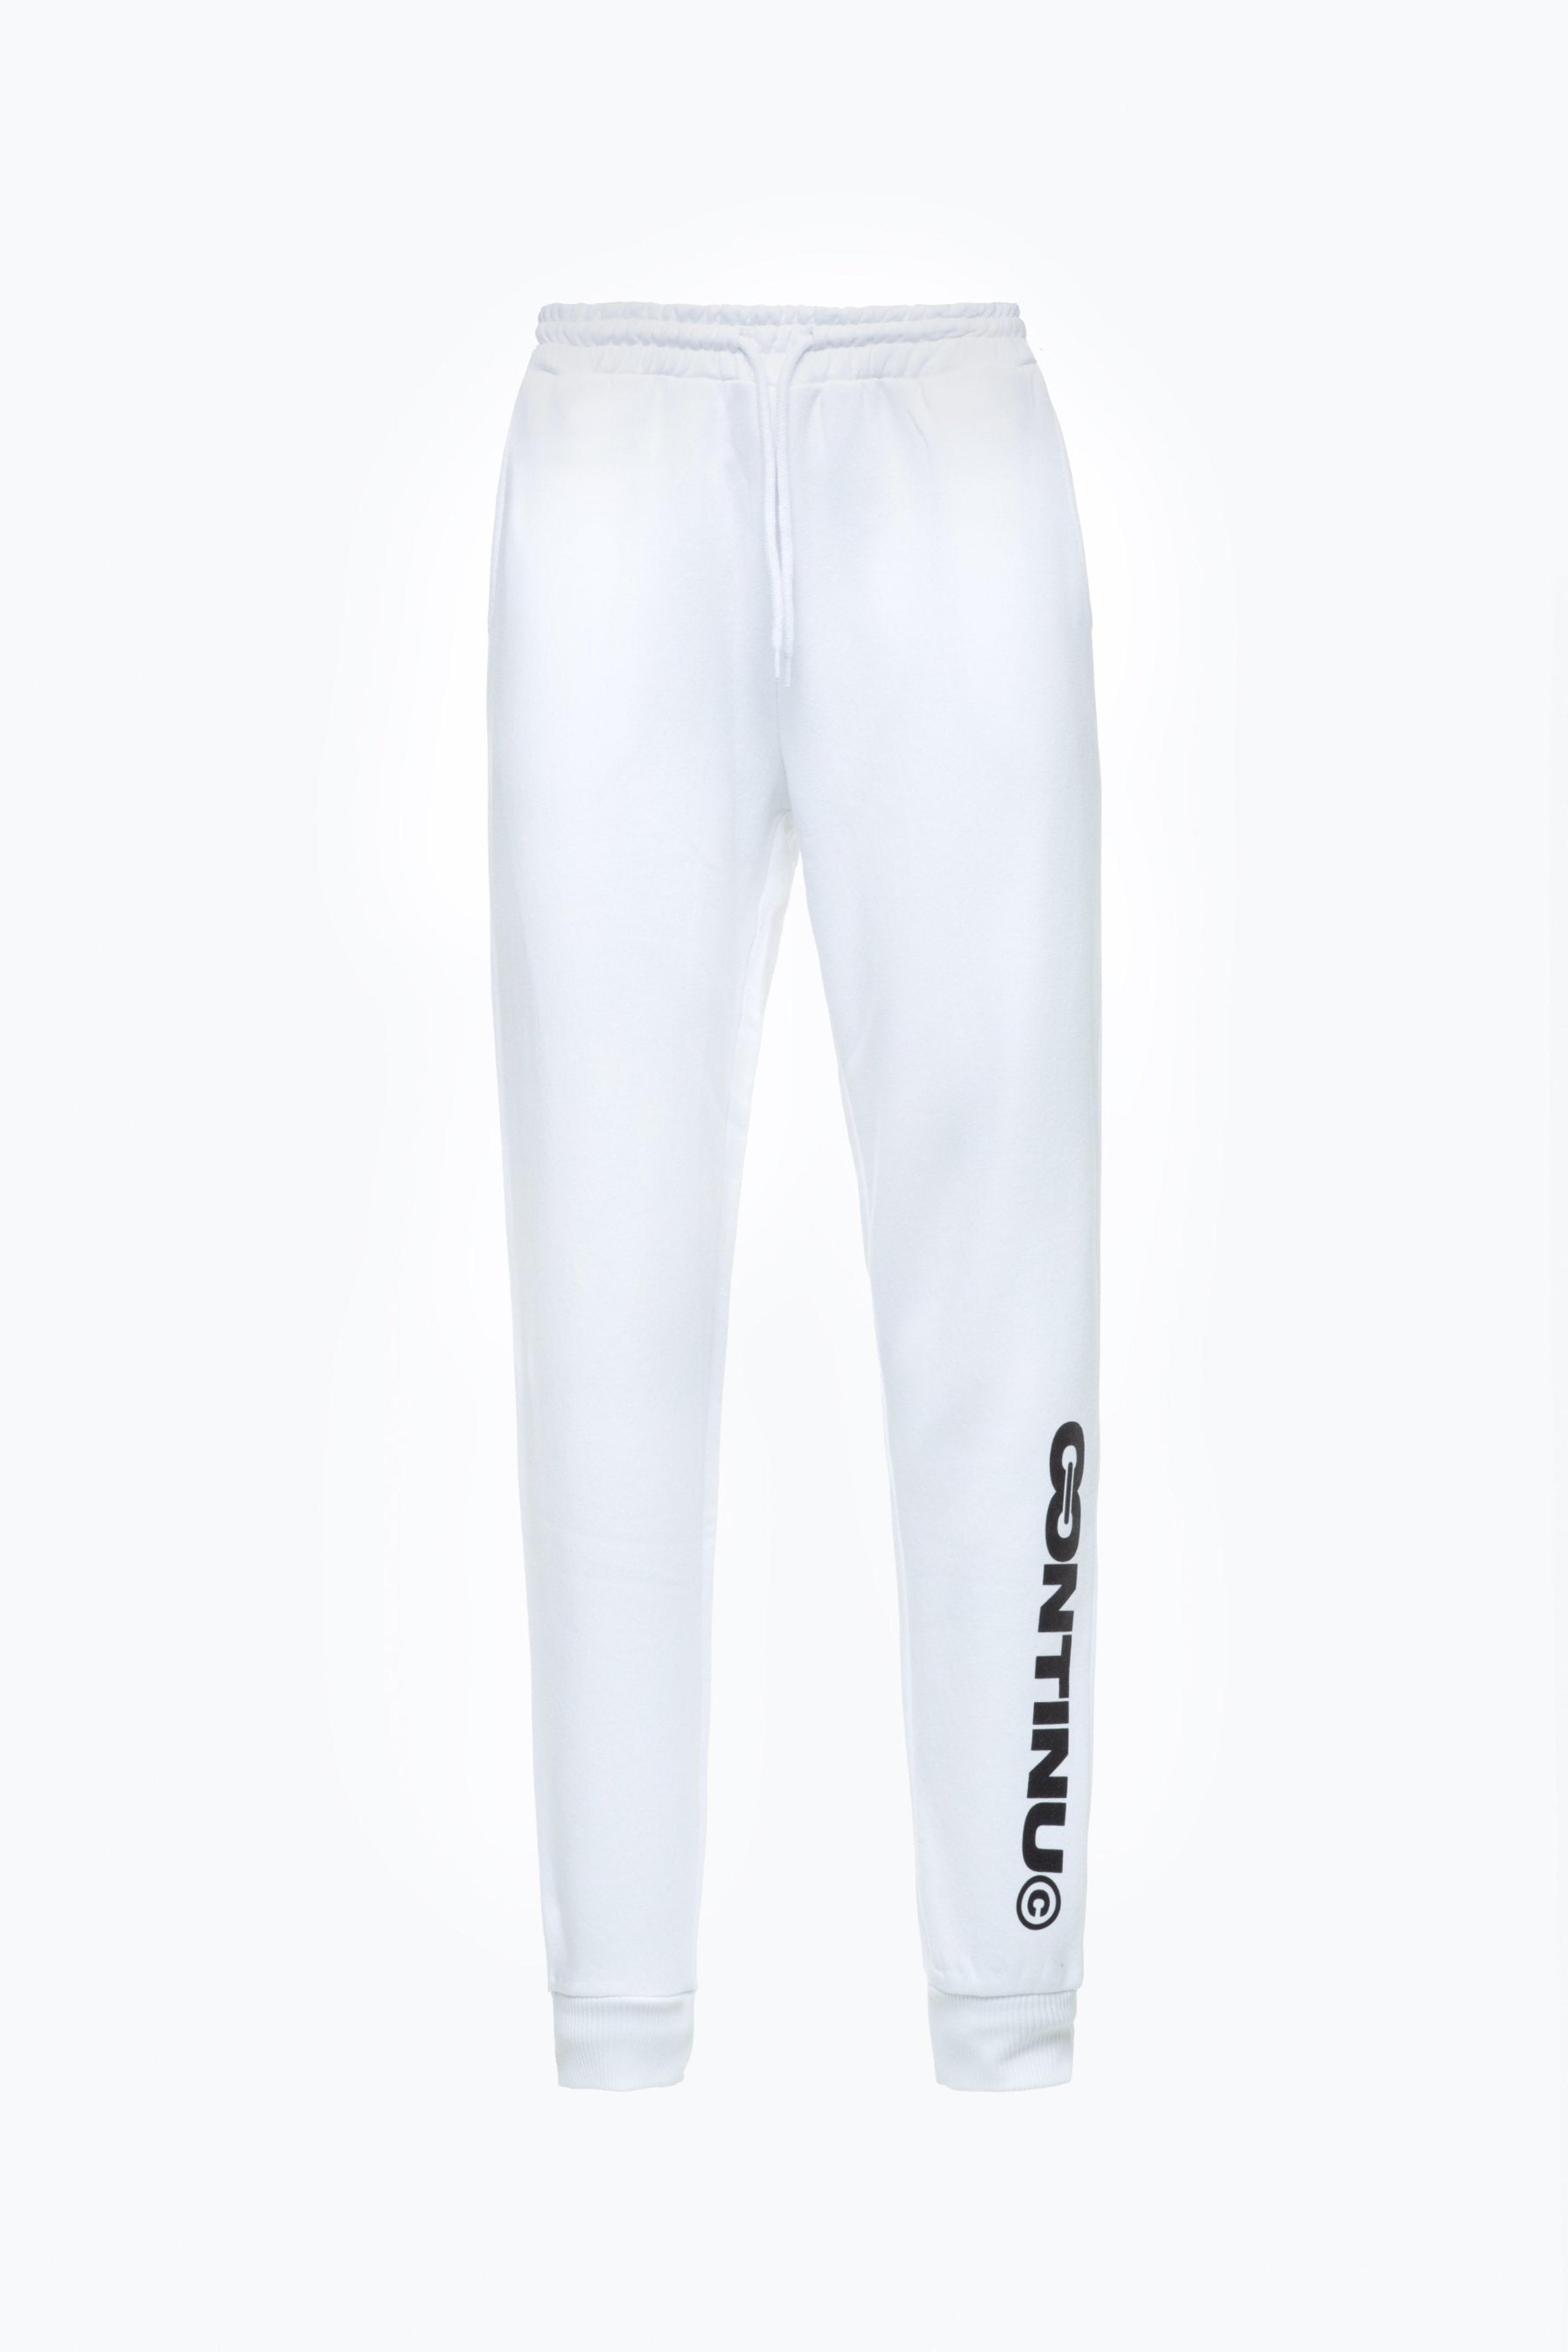 Alternate View 7 of CONTINU8 WHITE JOGGERS